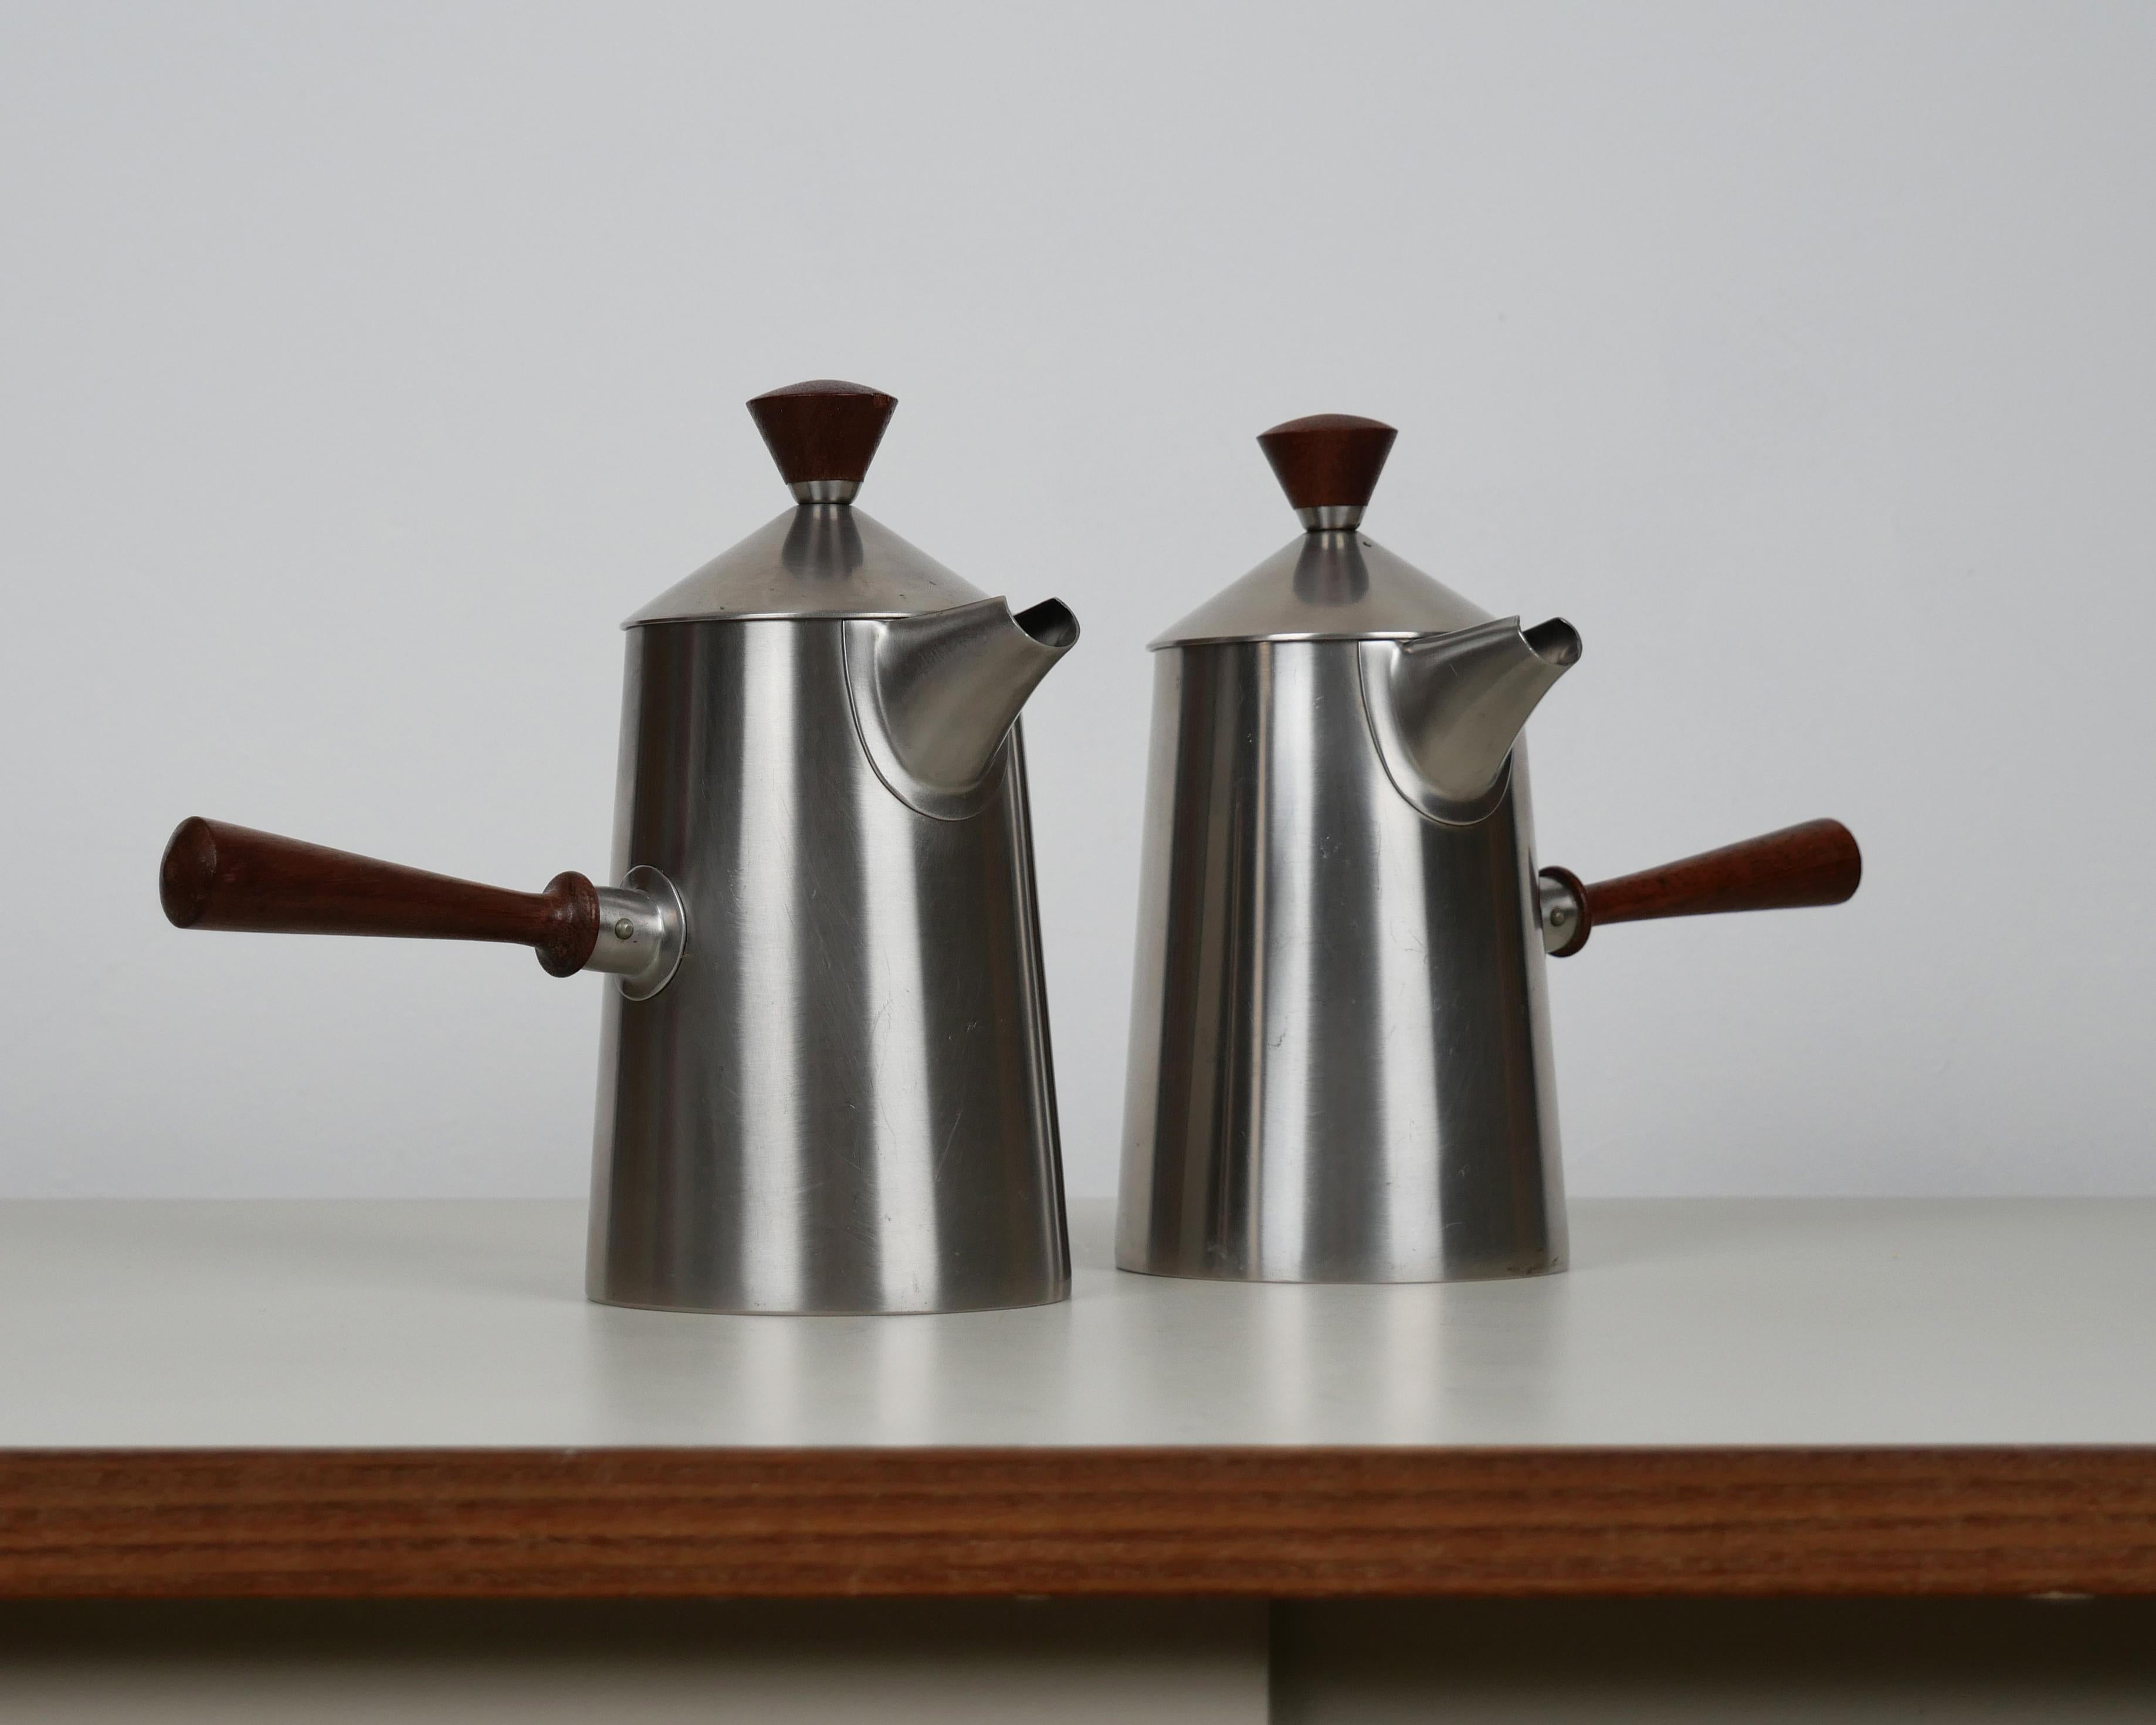 Robert Welch for Old Hall, 1957
Coffee pot and milk jug

Stainless steel with wooden handles
Excellent condition, with only very light marks. Appears generally unused
Makers stamp to underside of each

Dimensions each approx.: diameter 9.5